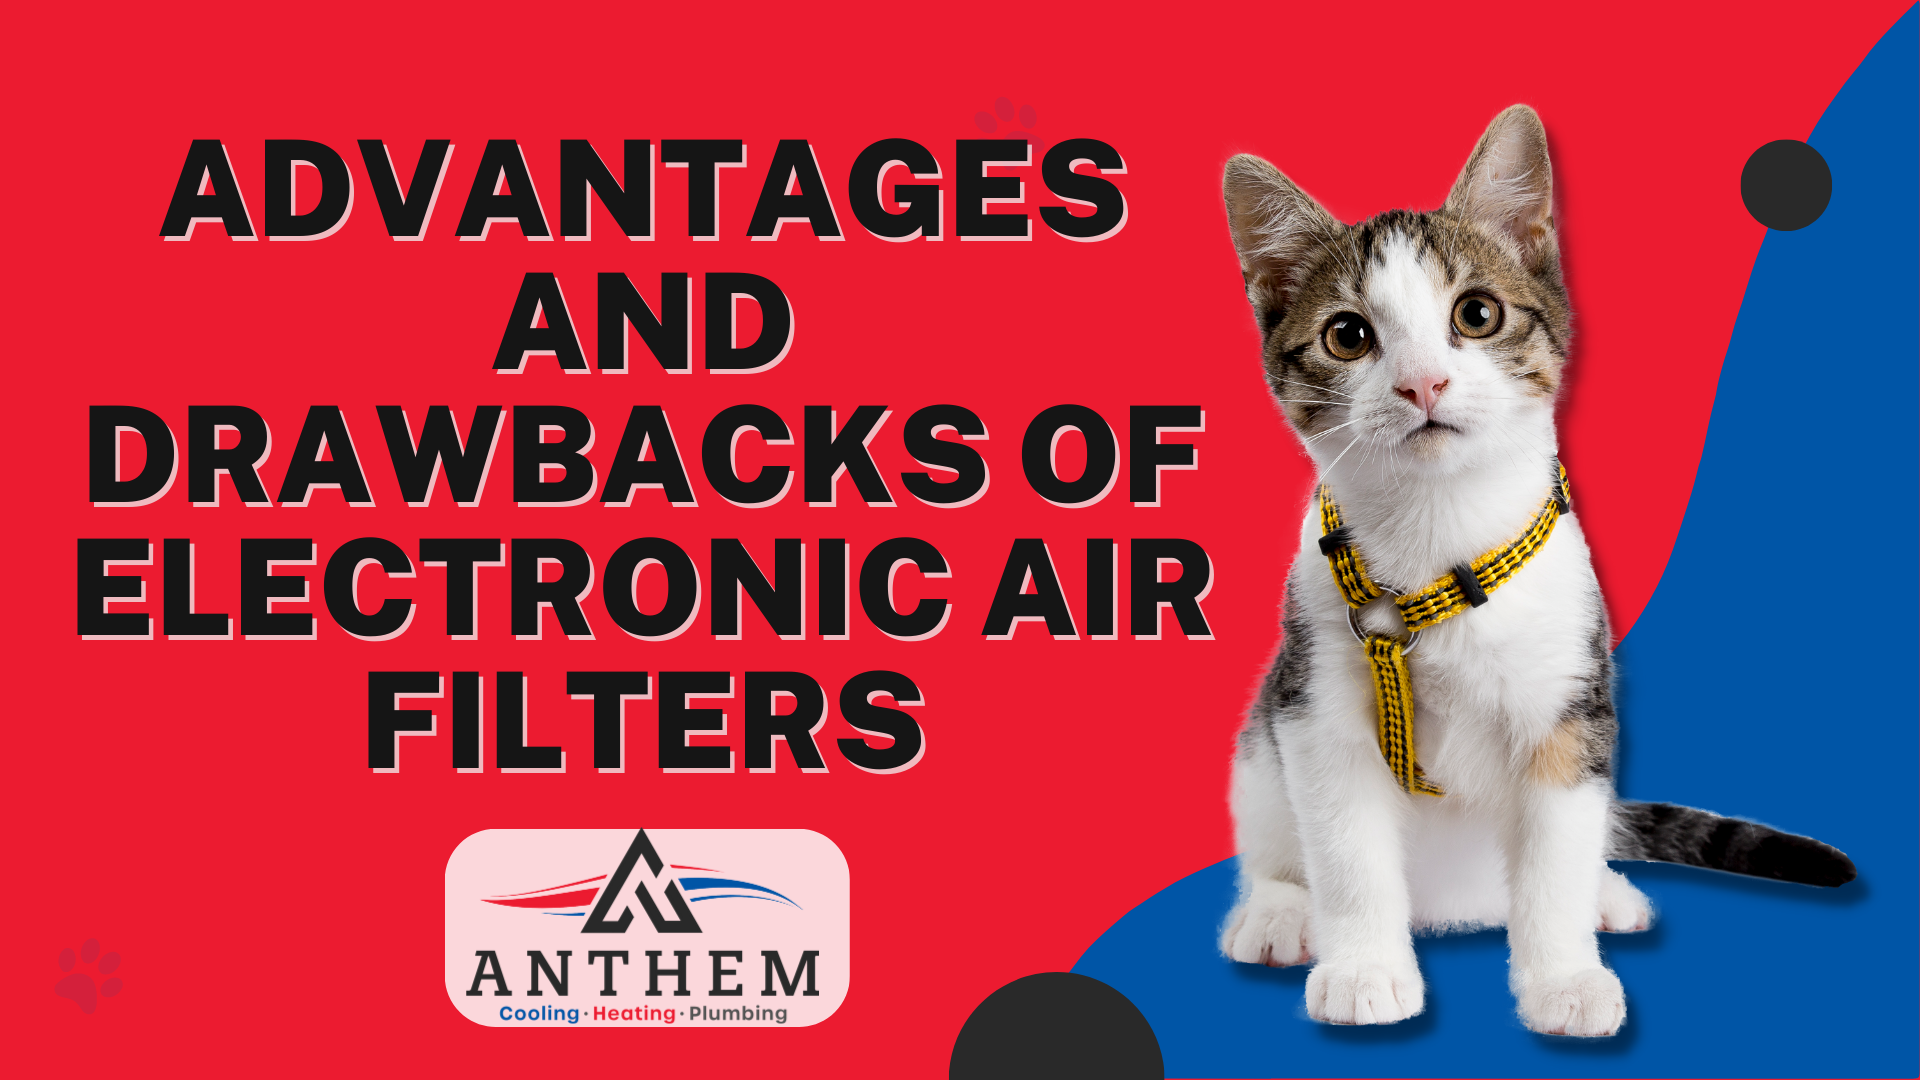 Advantages and Drawbacks of Electronic Air Filters